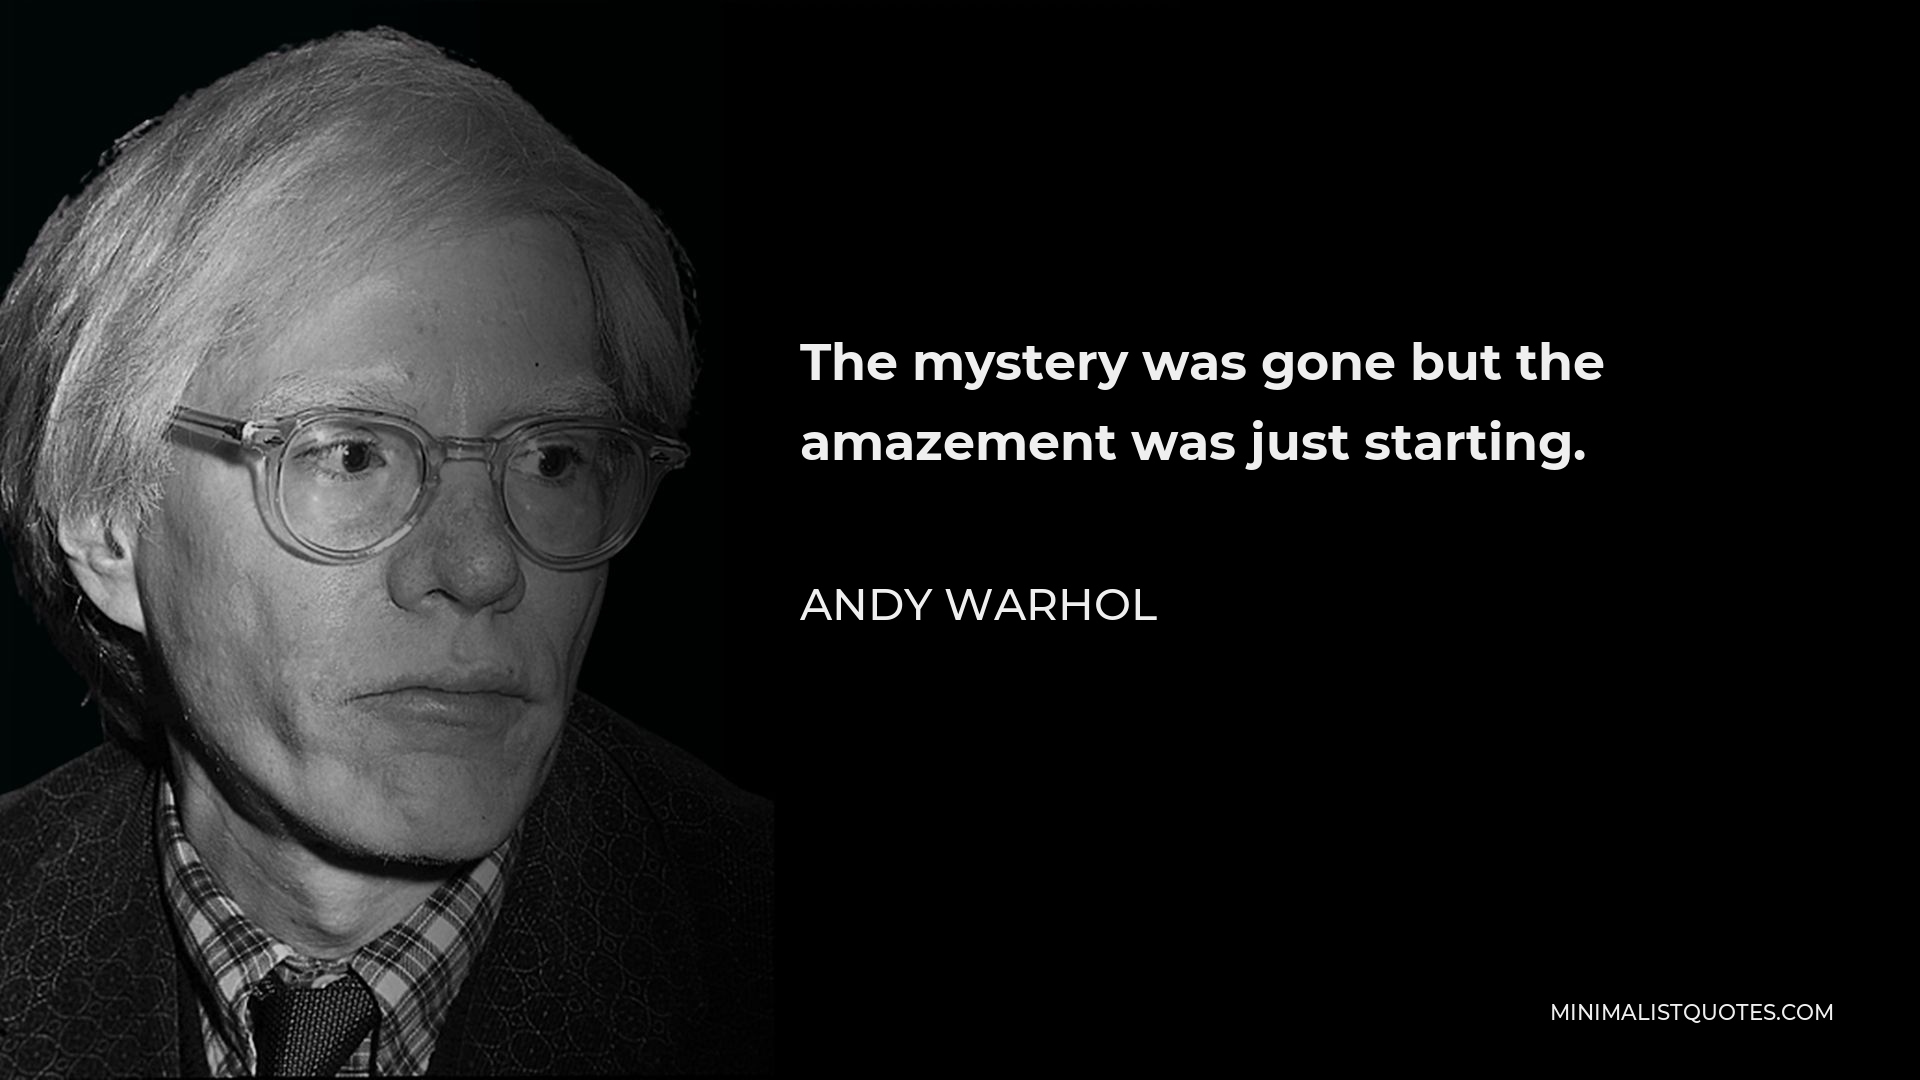 Andy Warhol Quote - The mystery was gone but the amazement was just starting.